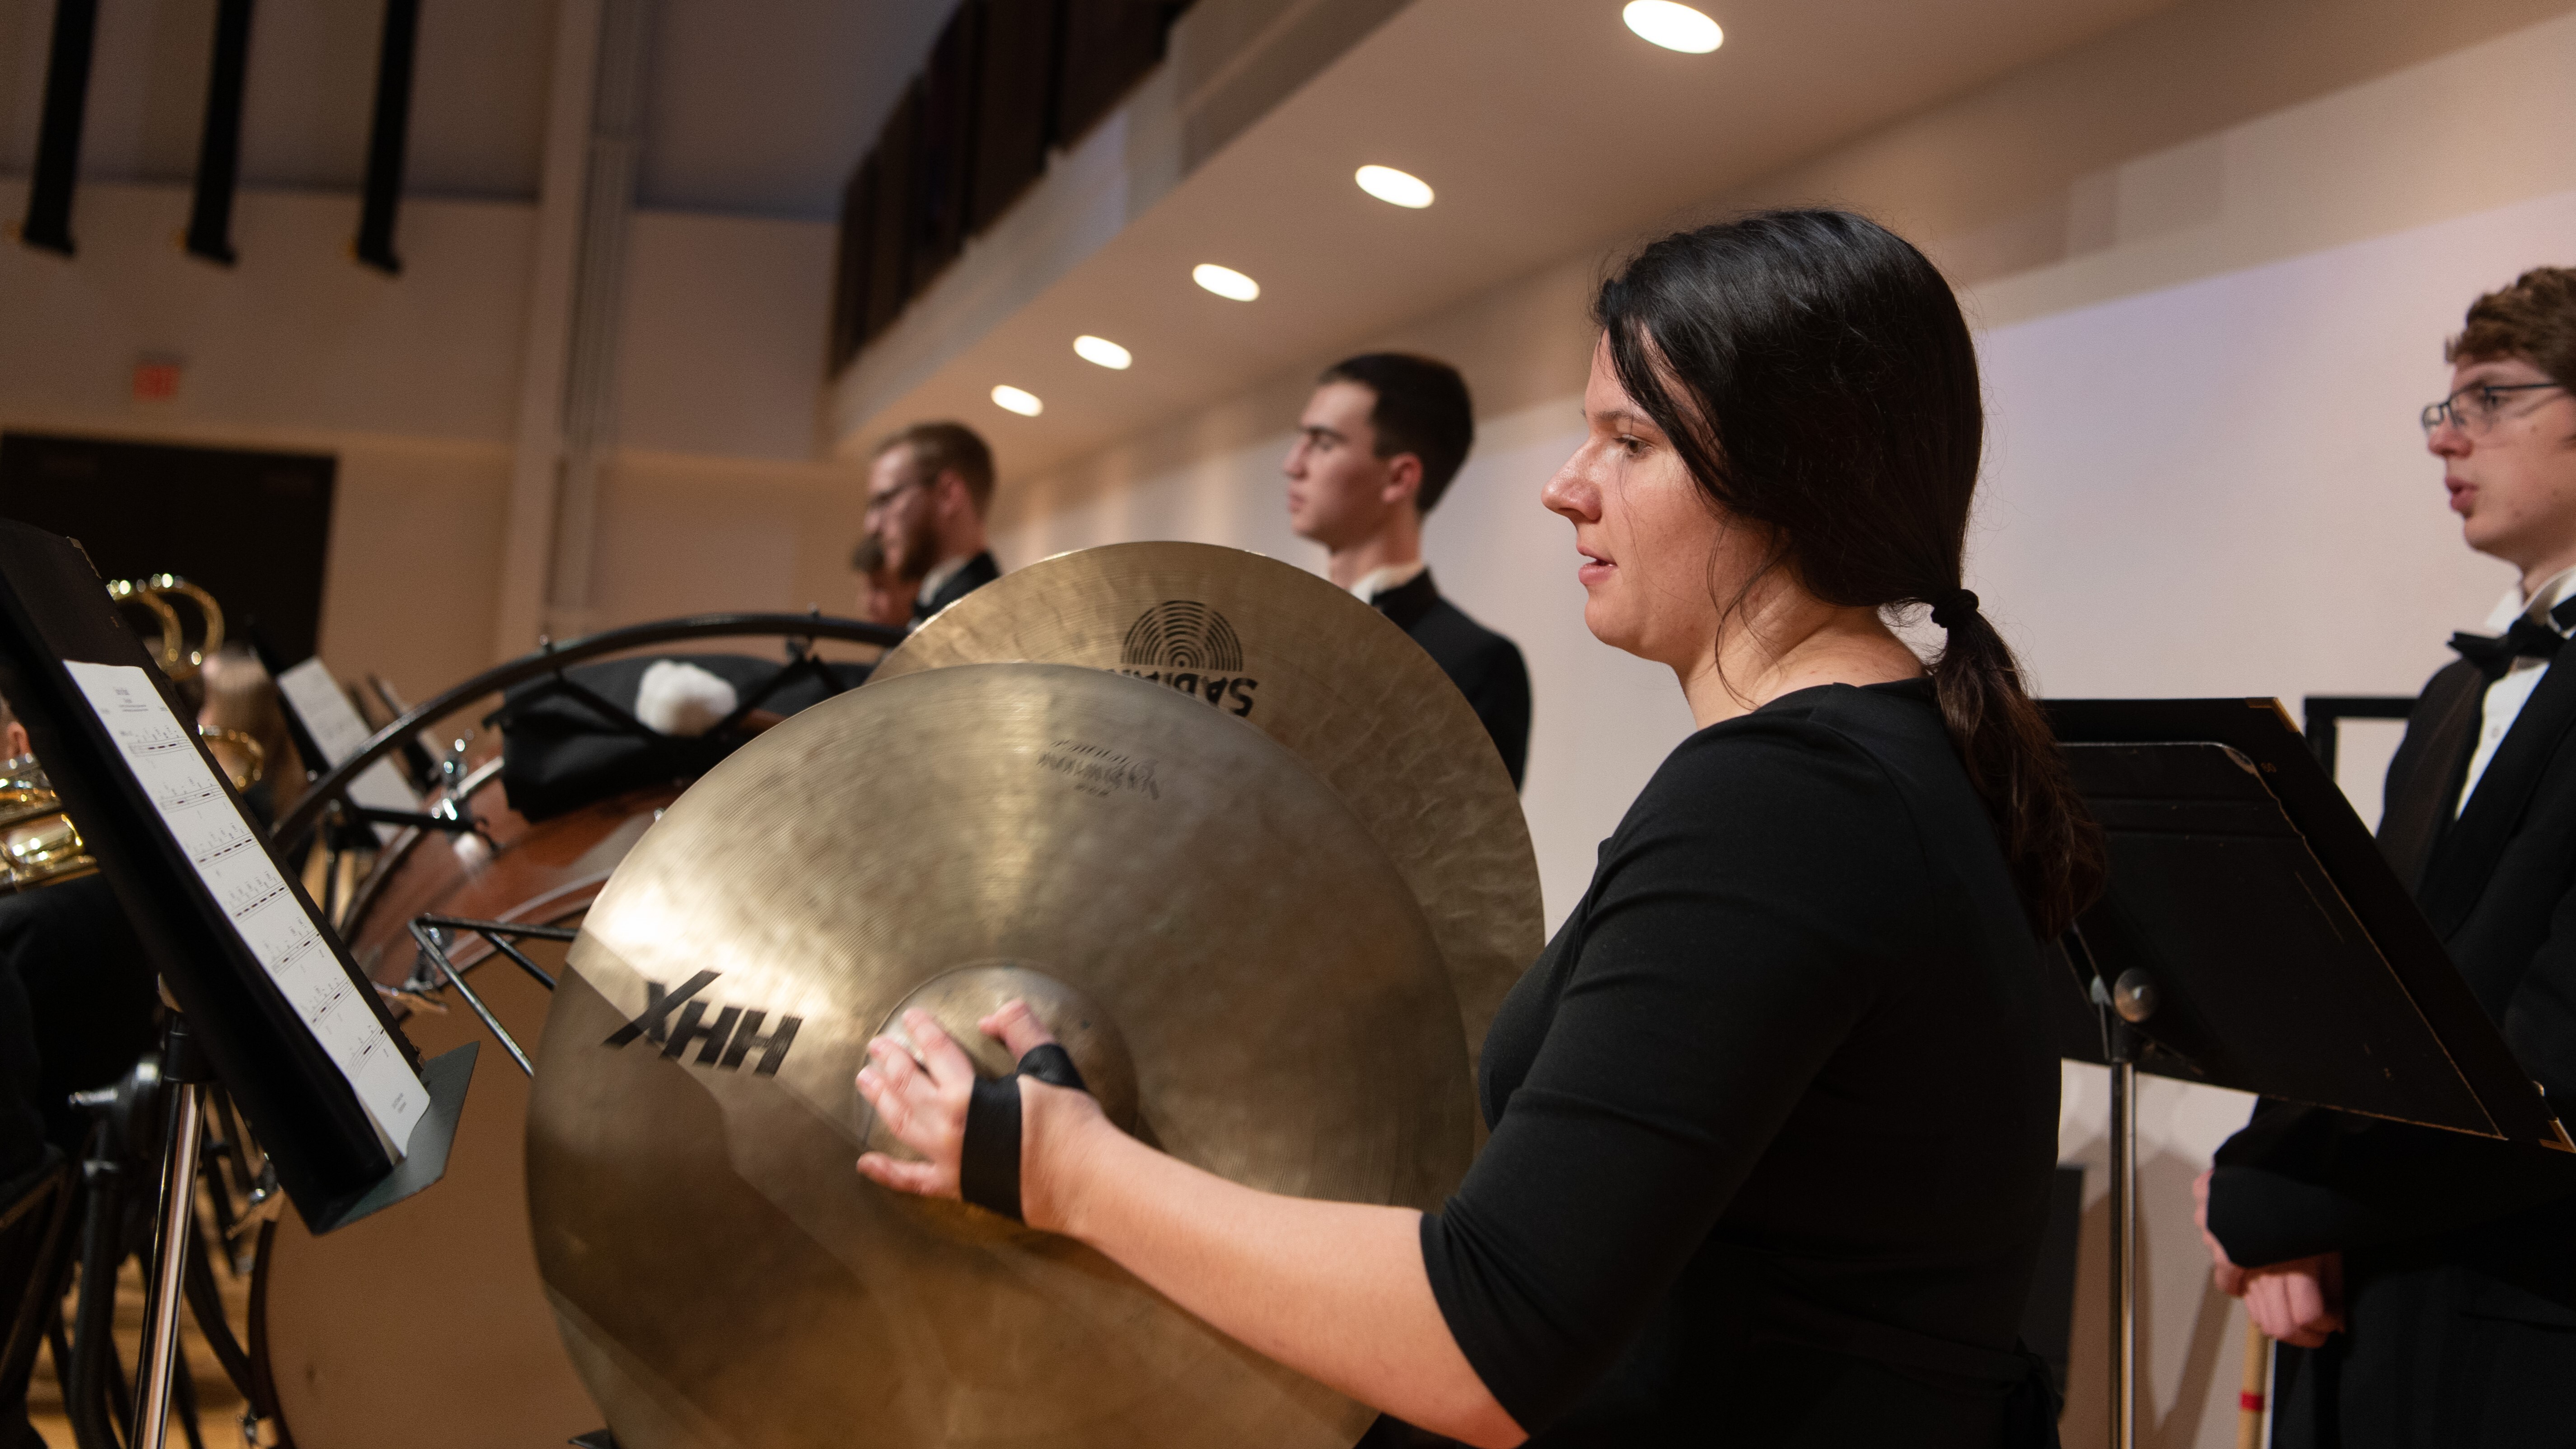 Female student plays cymbals